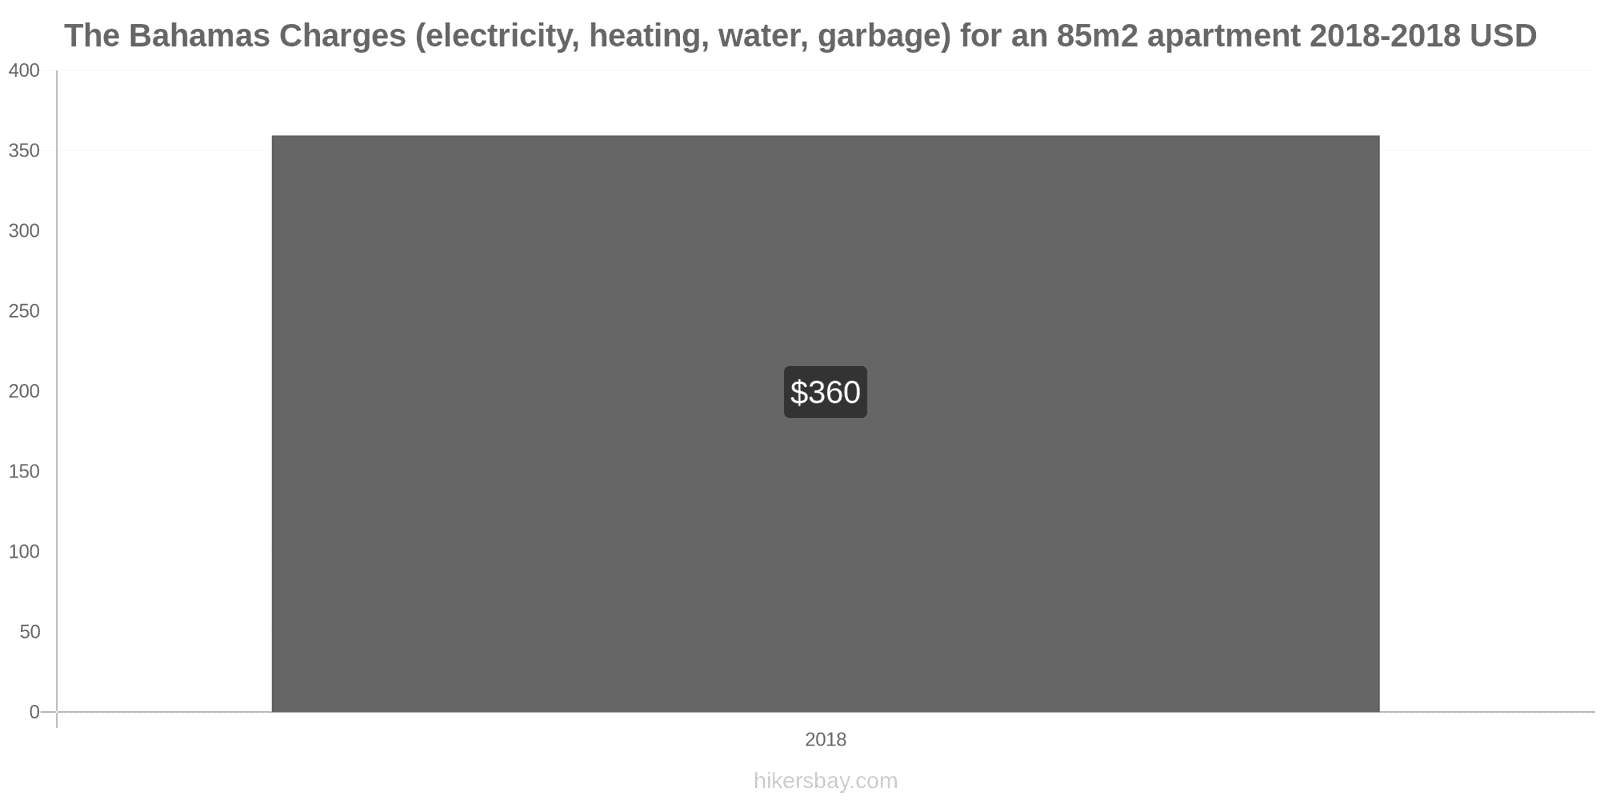 The Bahamas price changes Utilities (electricity, heating, water, garbage) for an 85m2 apartment hikersbay.com